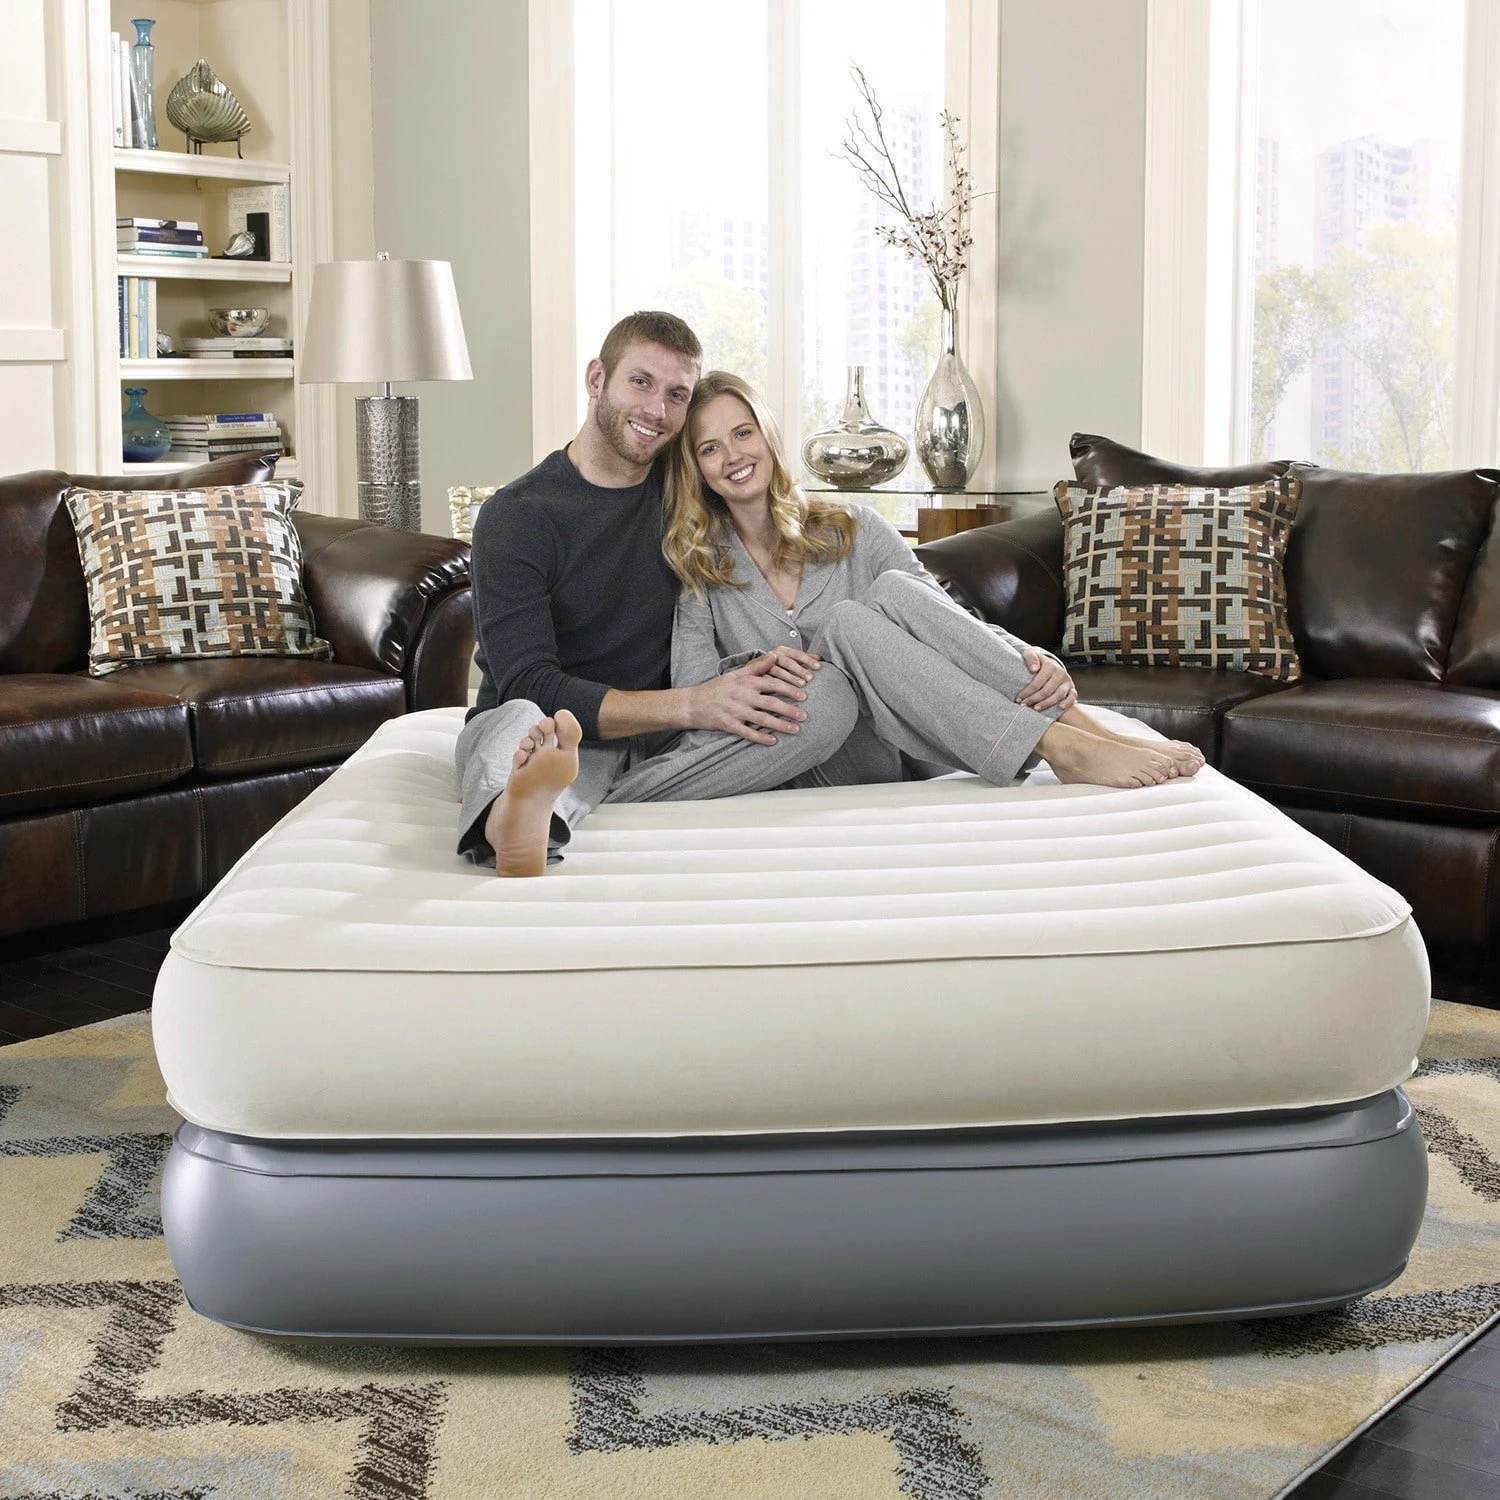 Mirakey airbed with Built-In electric pump Luxury Raised Double air bed inflatable mattress